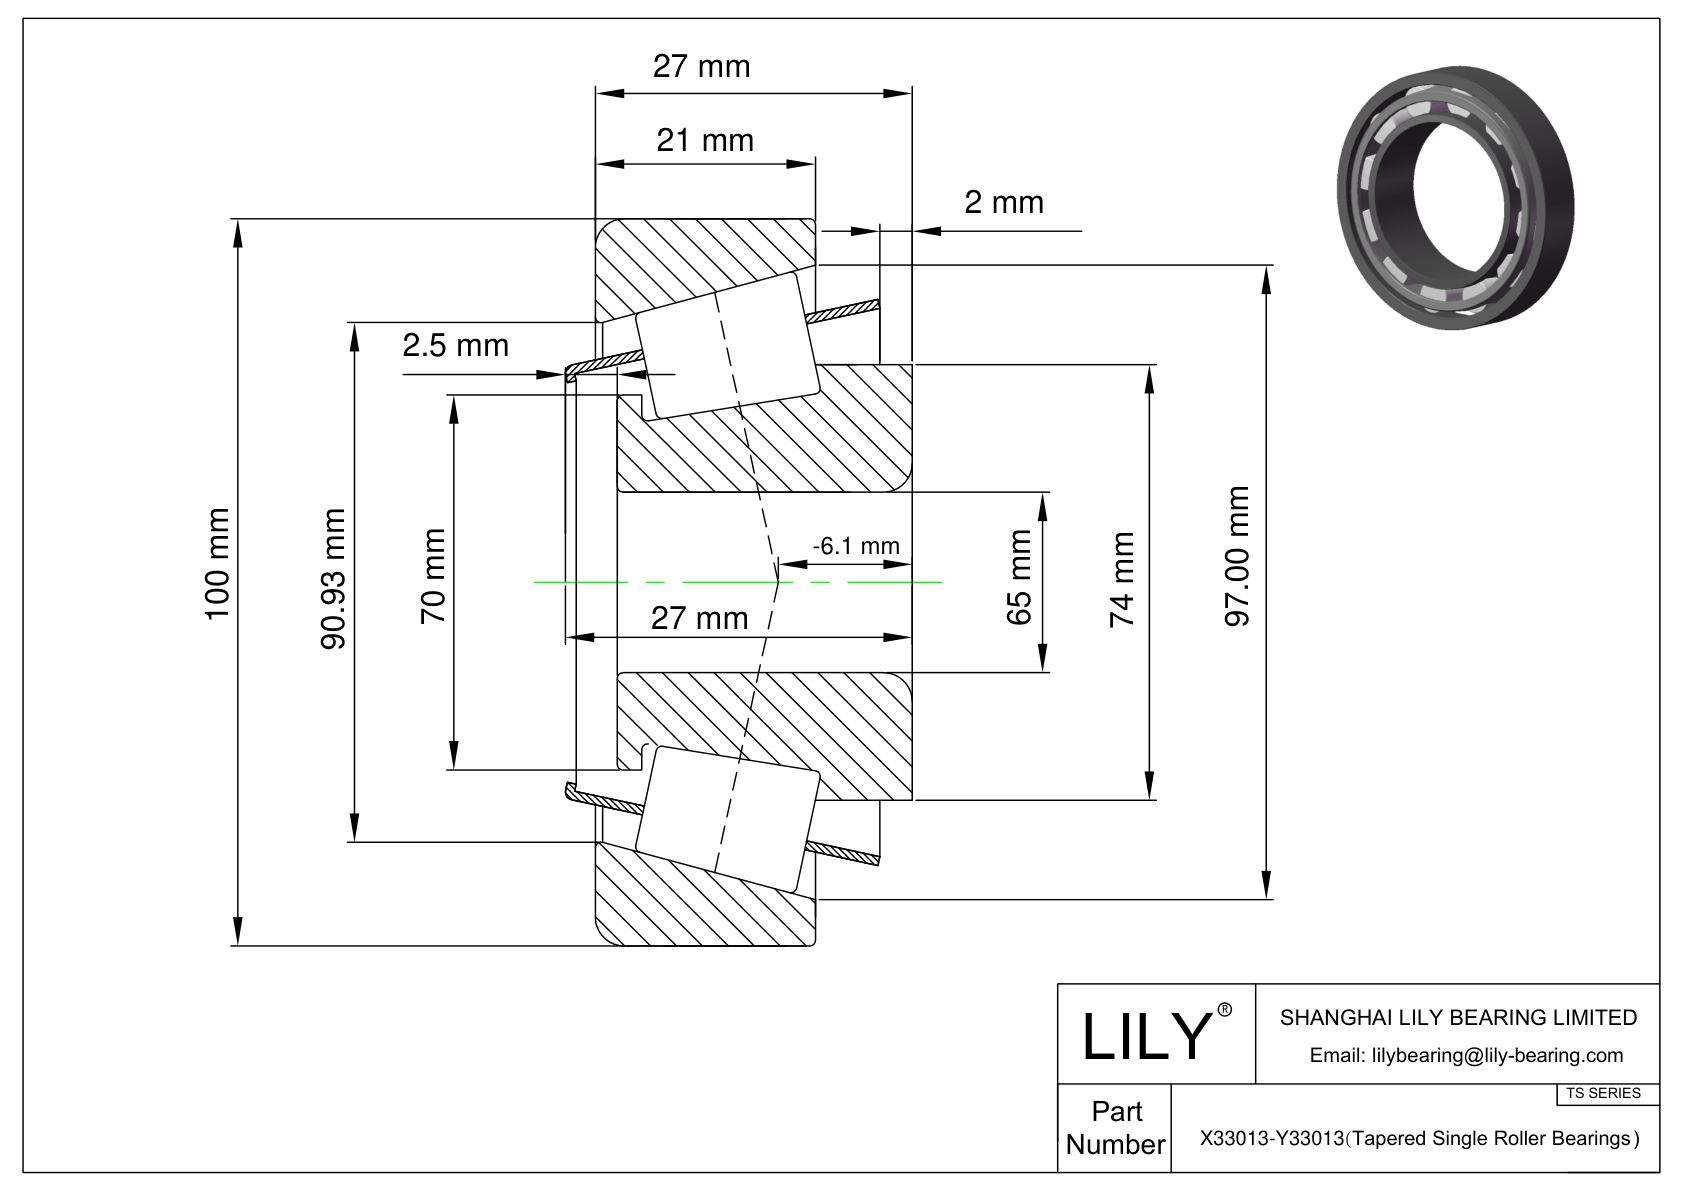 X33013-Y33013 TS (Tapered Single Roller Bearings) (Metric) cad drawing